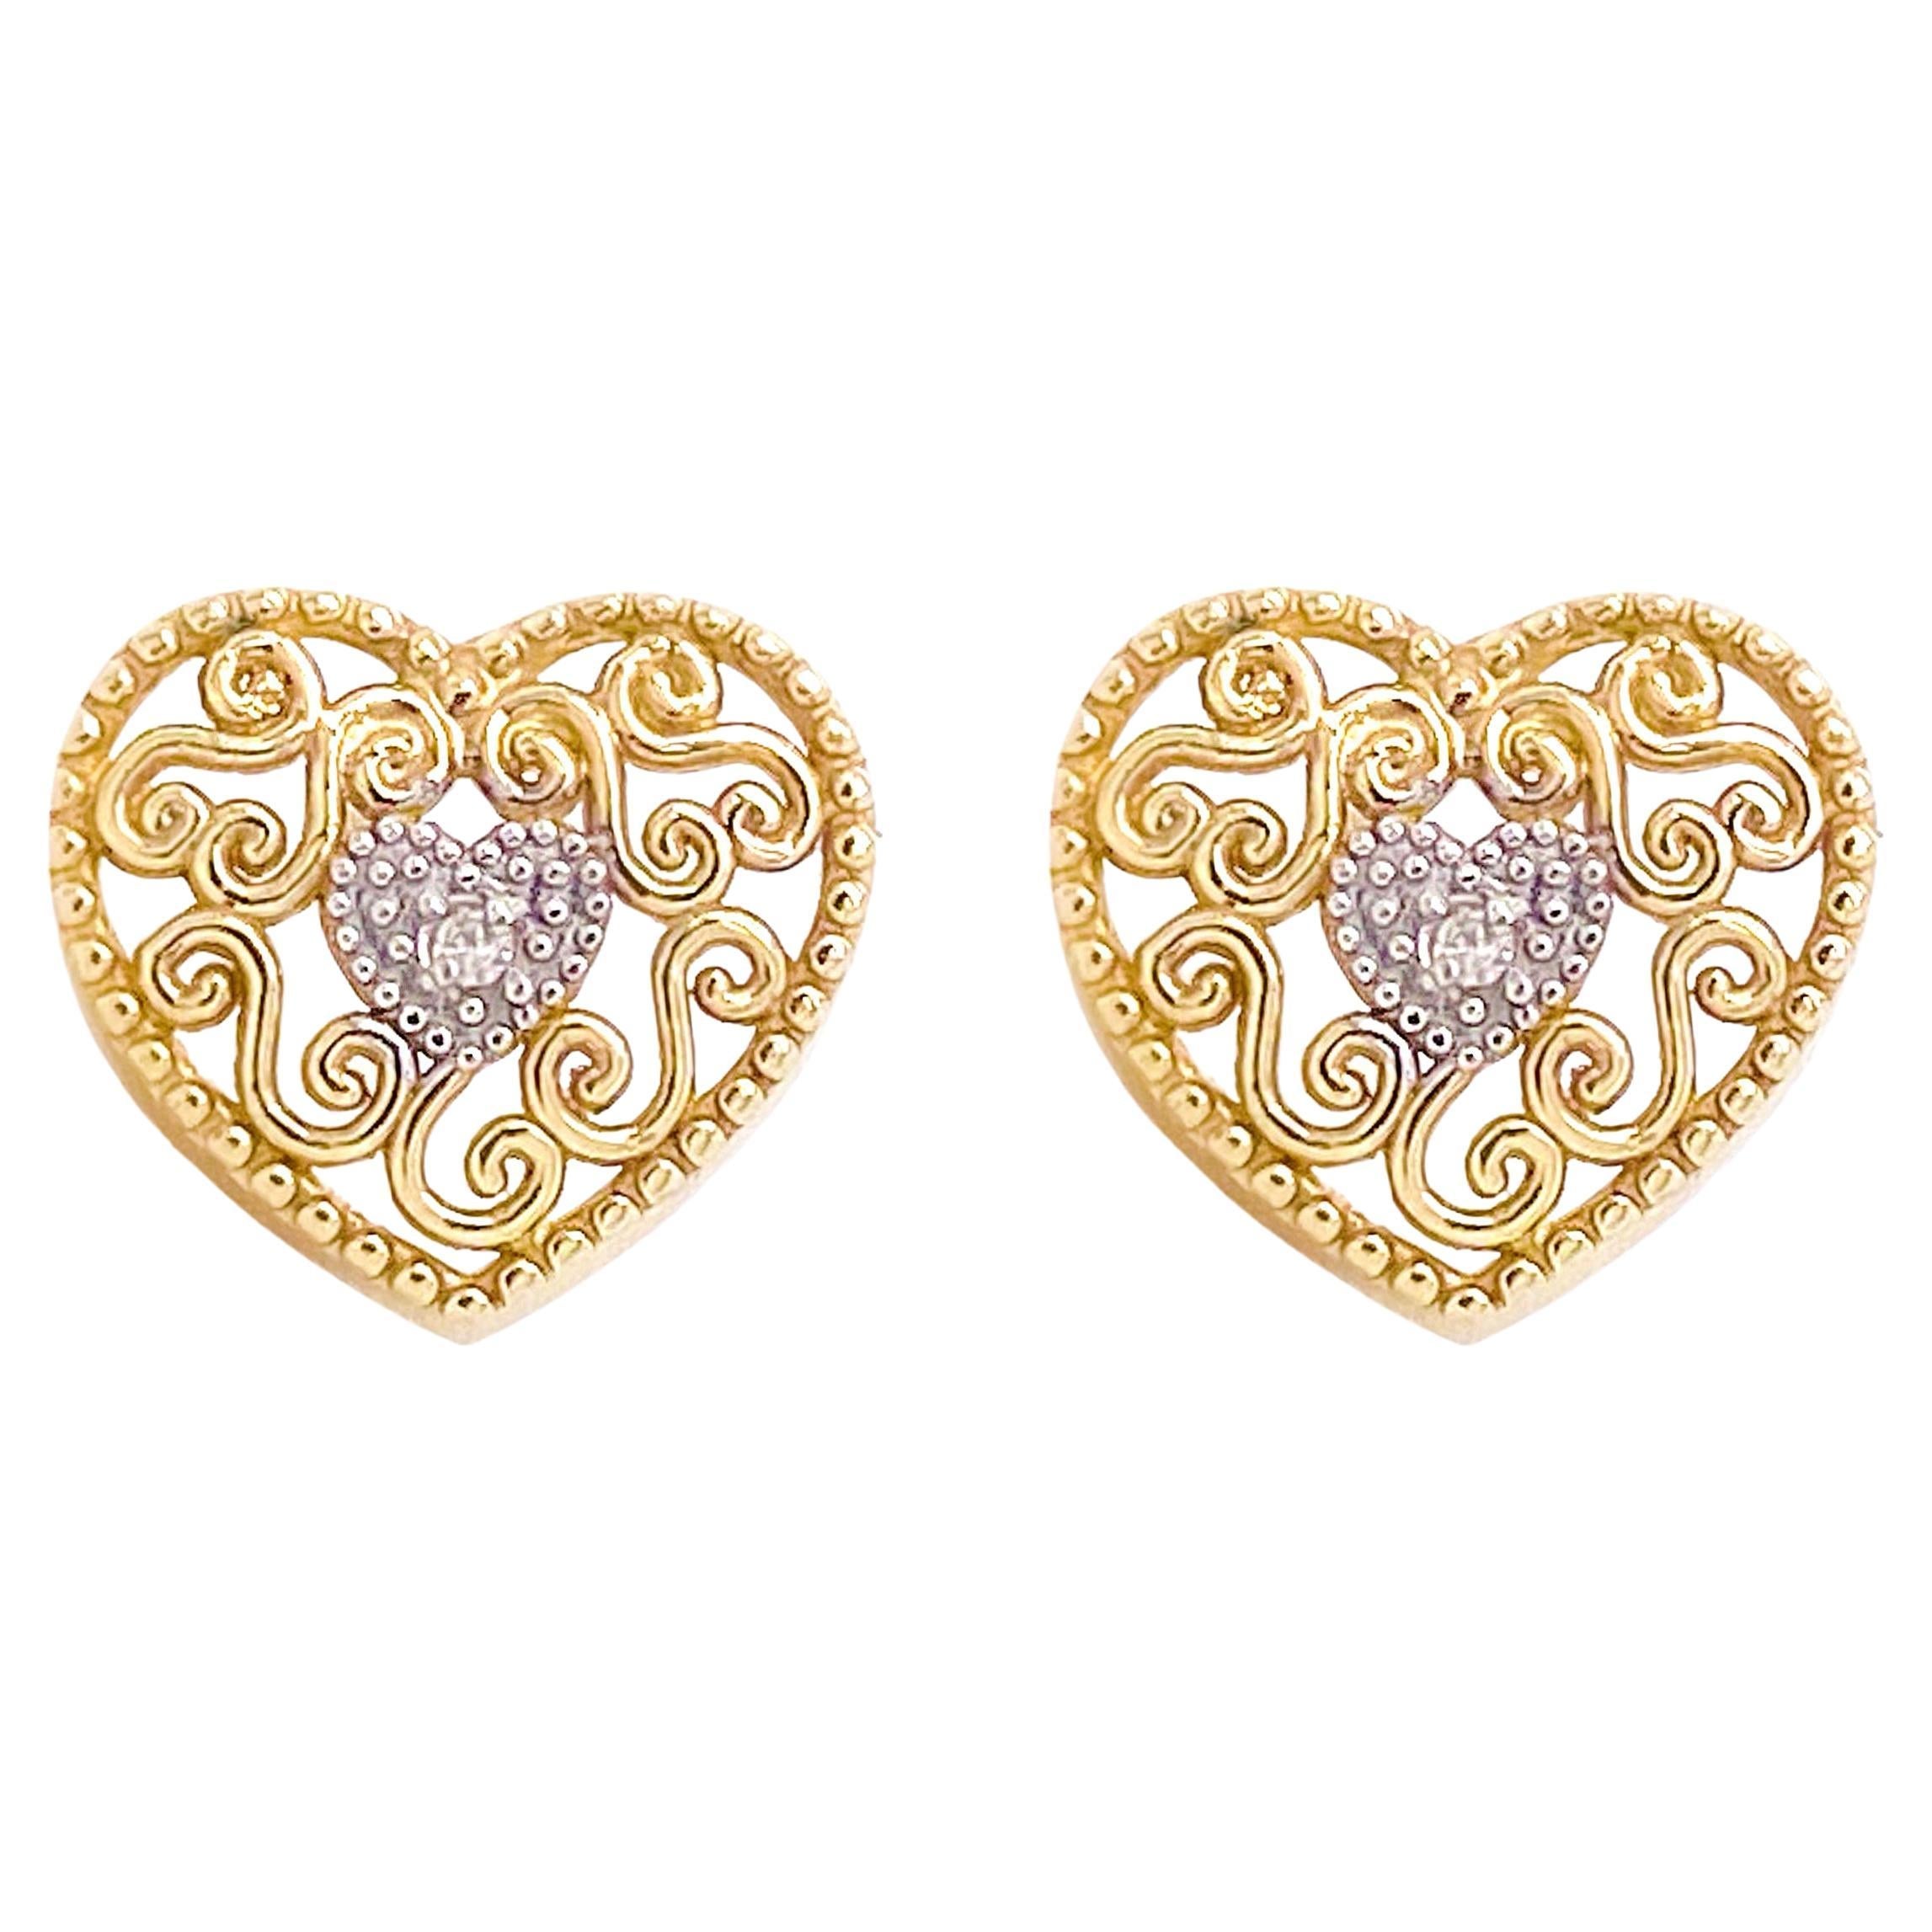 Gold Finish Double Heart Shaped Earrings Design by Papa don't preach by  Shubhika Accessories at Pernia's Pop Up Shop 2024